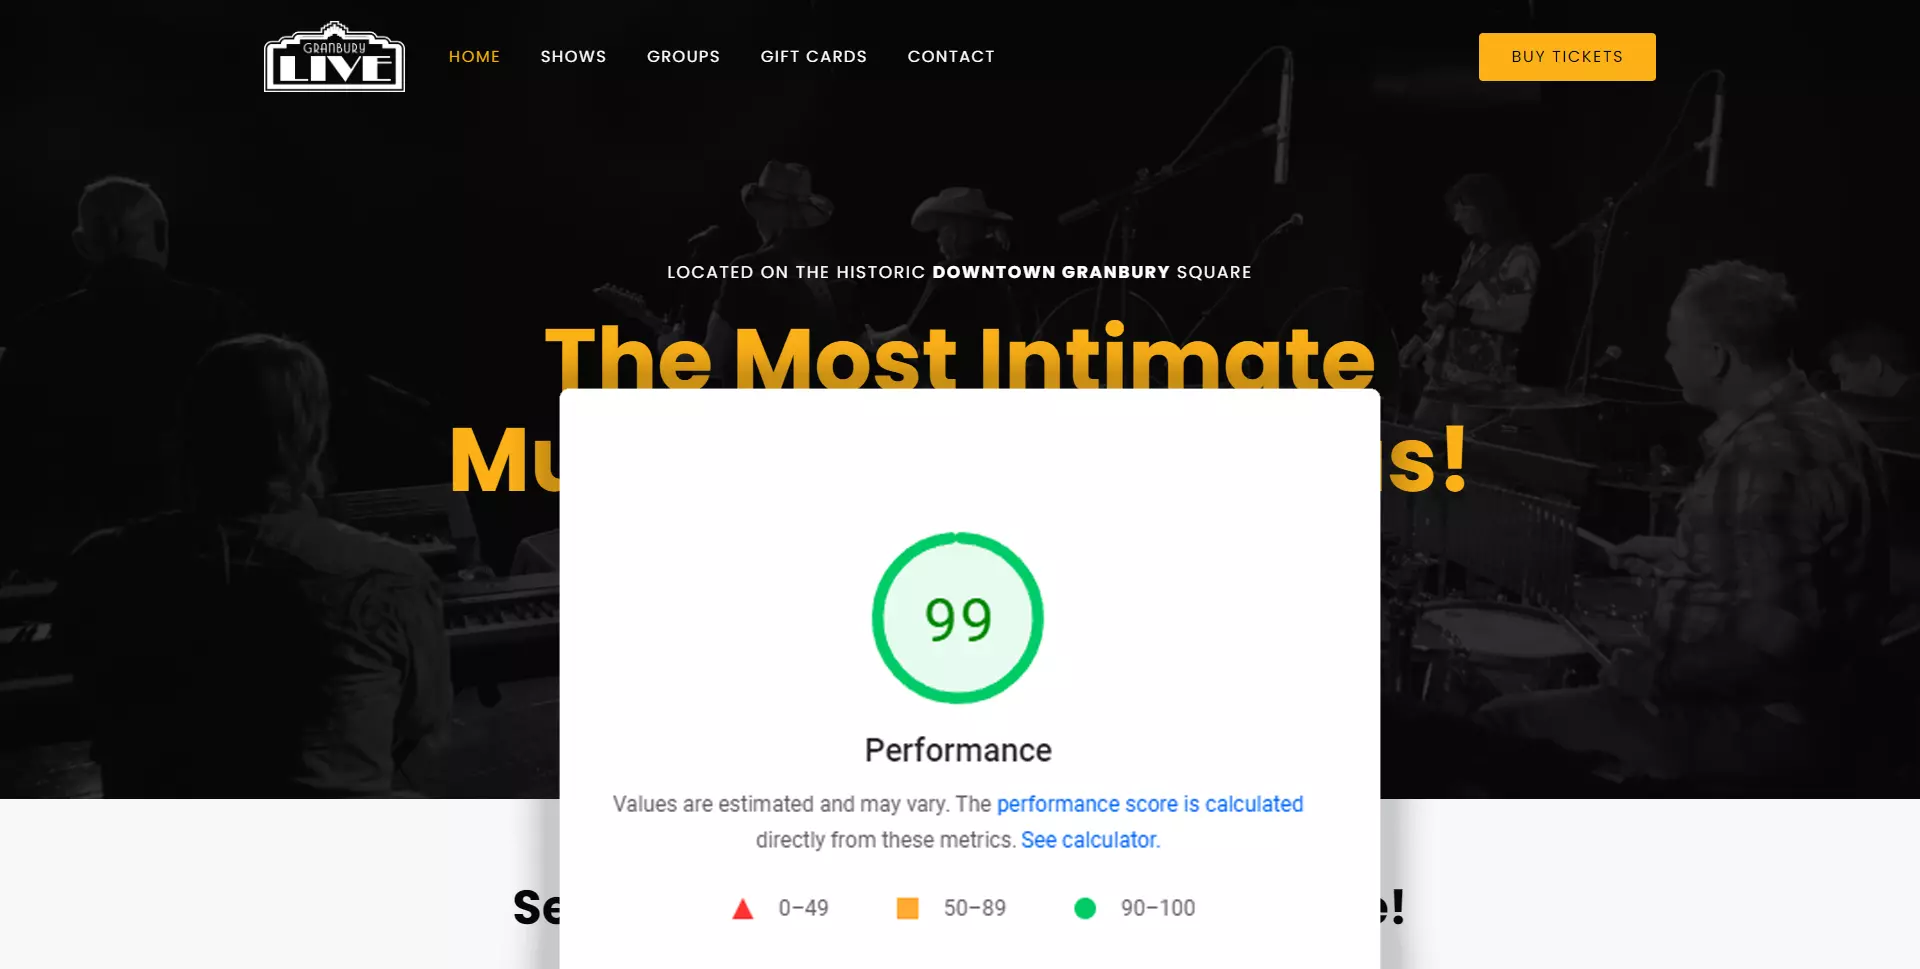 Granbury Live website with a performance score of 99%